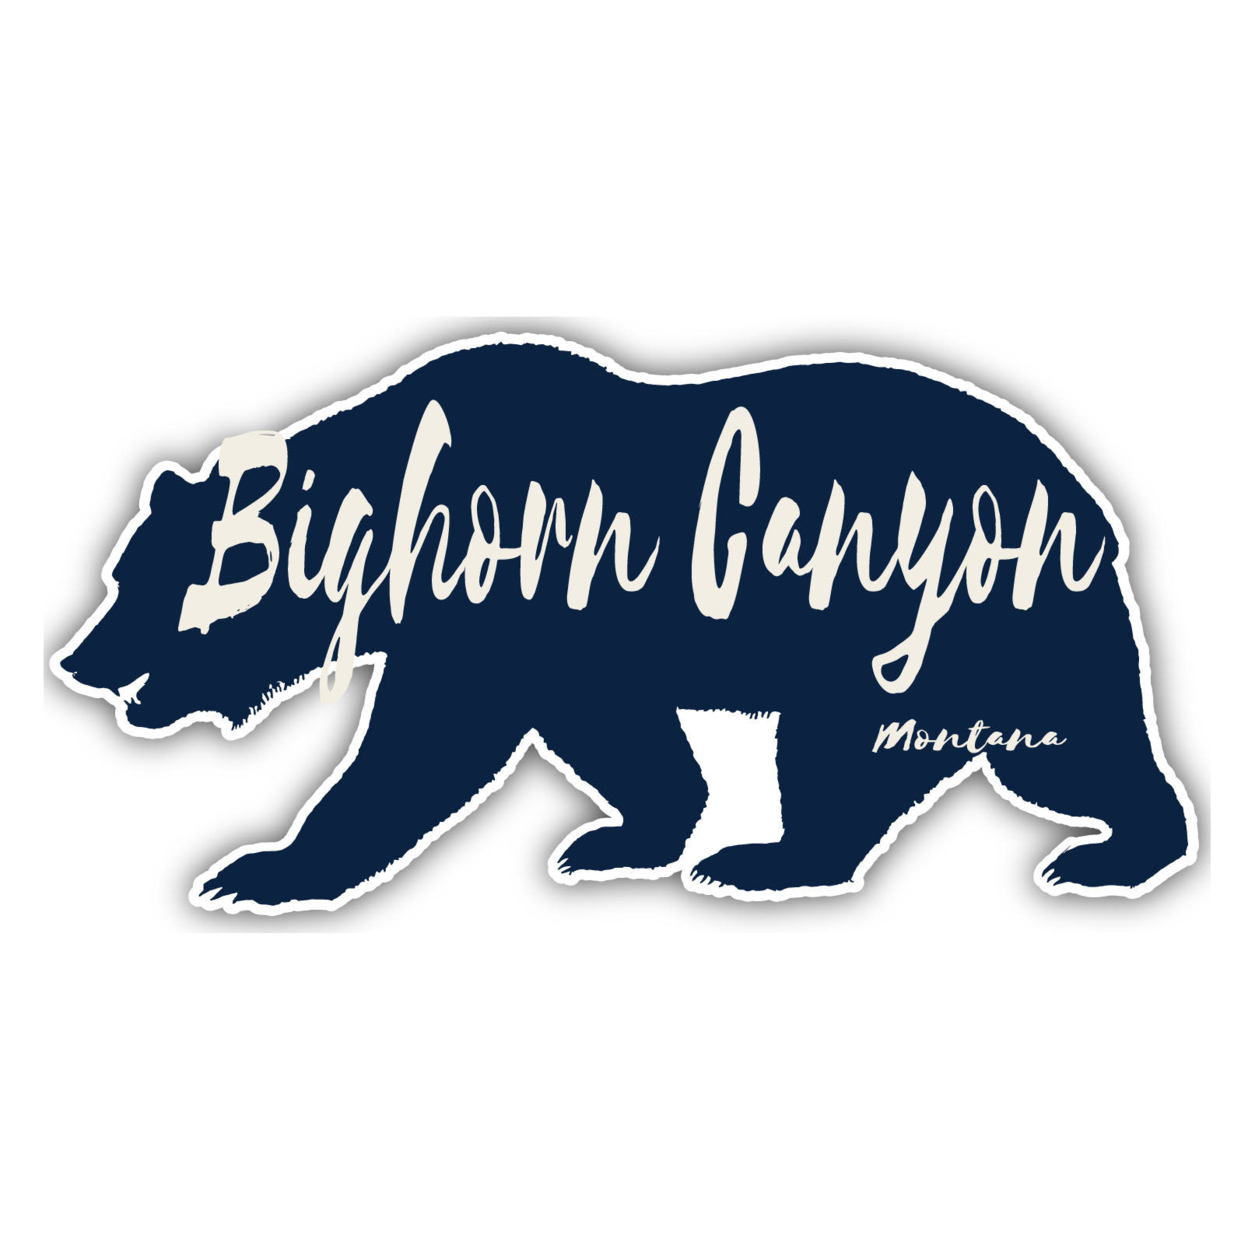 Bighorn Canyon Montana Souvenir Decorative Stickers (Choose Theme And Size) - 4-Pack, 12-Inch, Bear